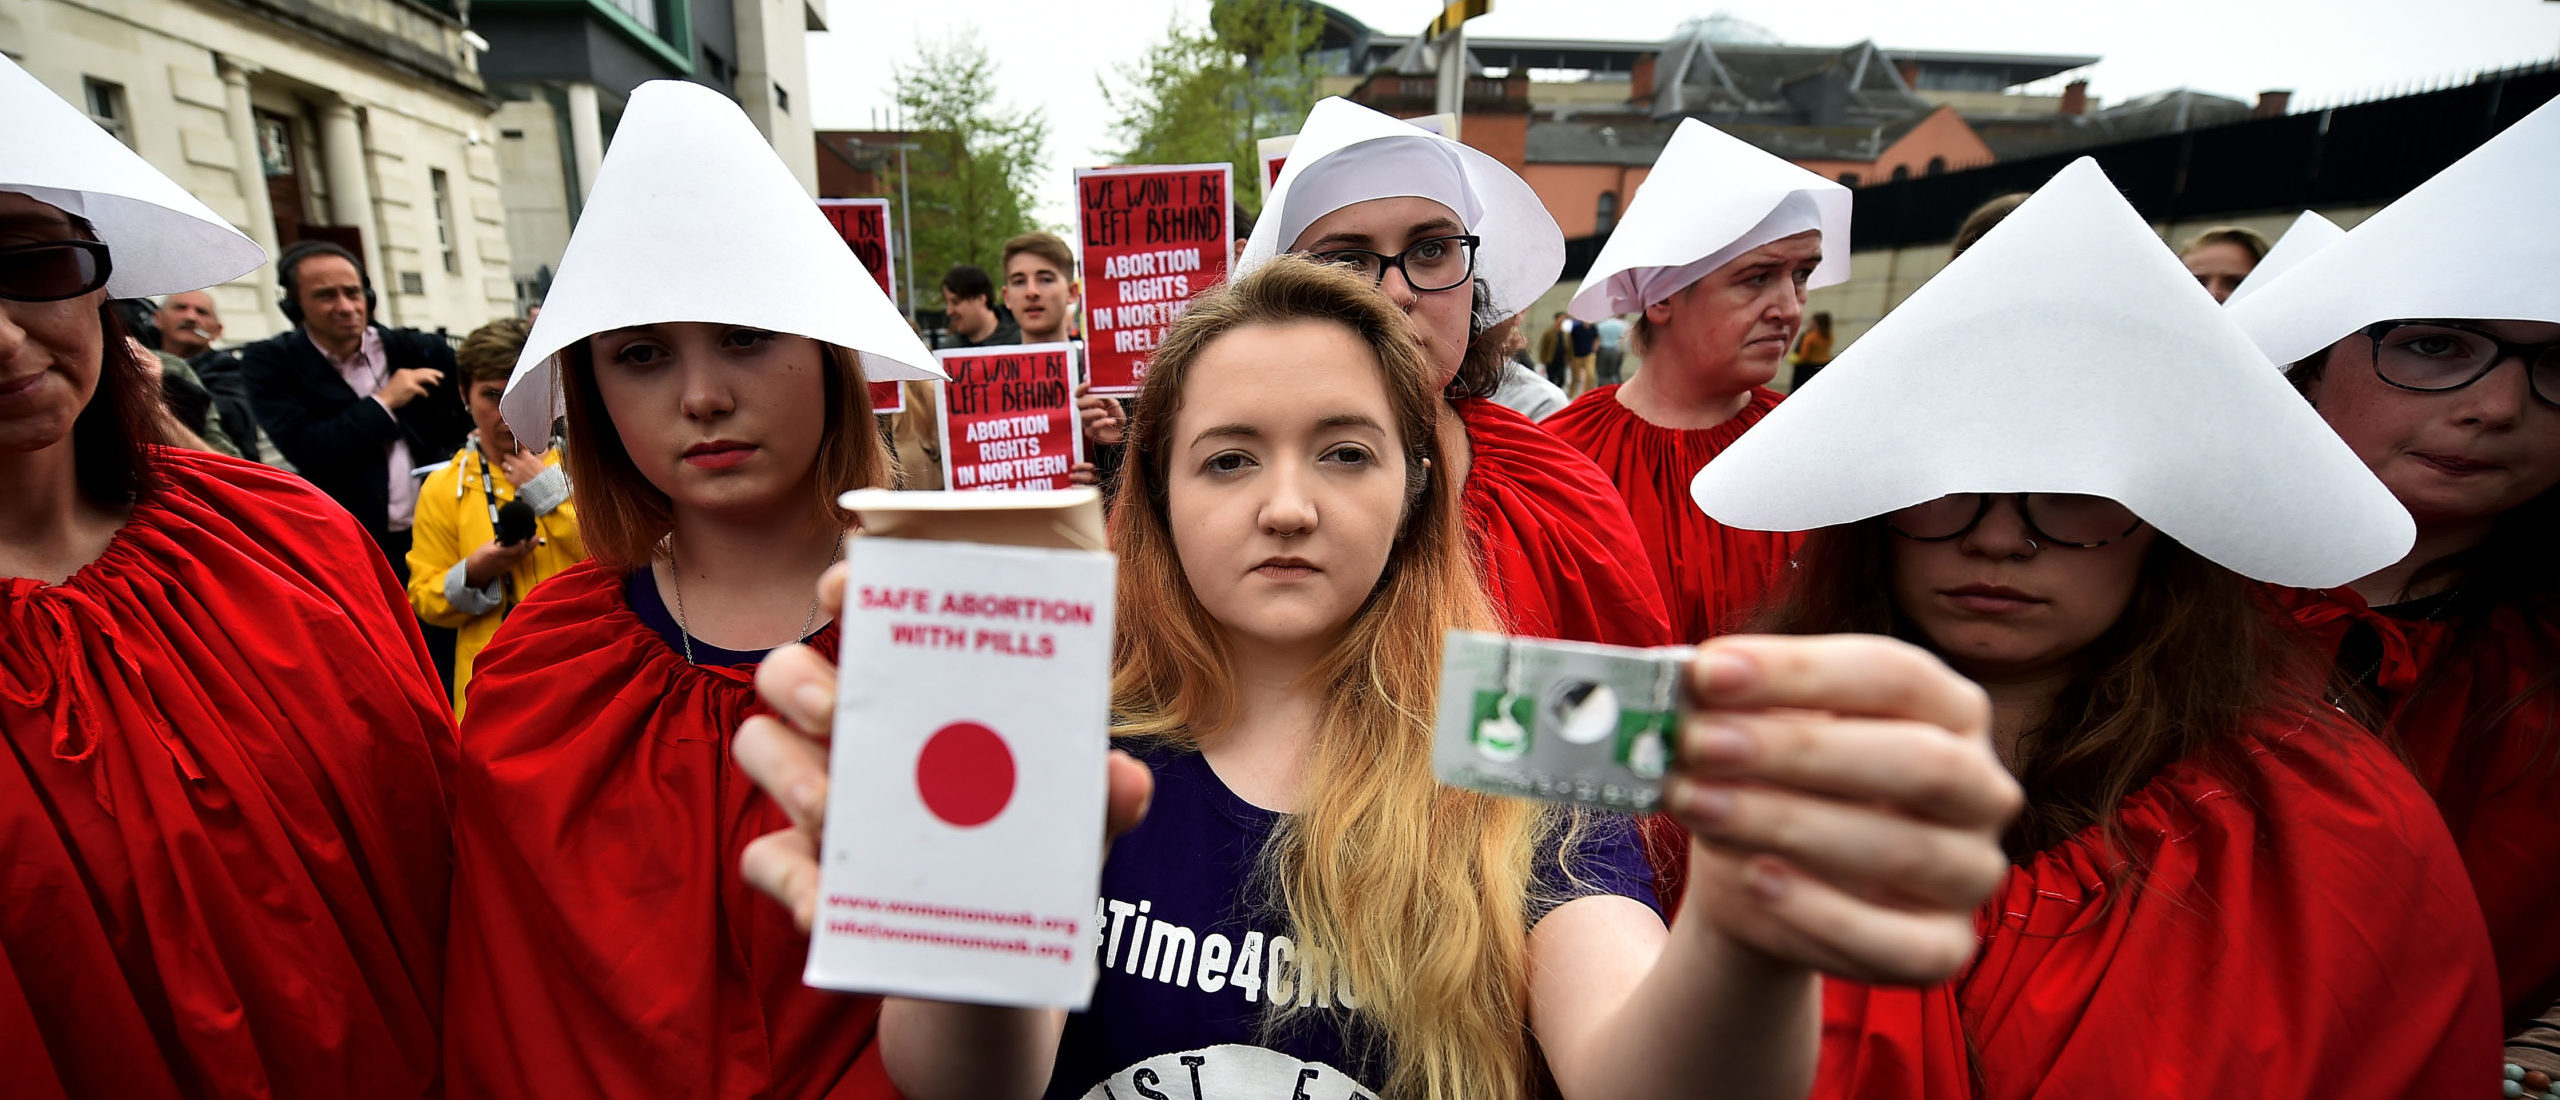 BELFAST, NORTHERN IRELAND - MAY 31: Eleanor Crossey Malone displays an abortion pill packet after taking a pill as abortion rights campaign group ROSA, Reproductive Rights Against Oppression, Sexism and Austerity distribute abortion pills from a touring bus on May 31, 2018 in Belfast, Northern Ireland. (Photo by Charles McQuillan/Getty